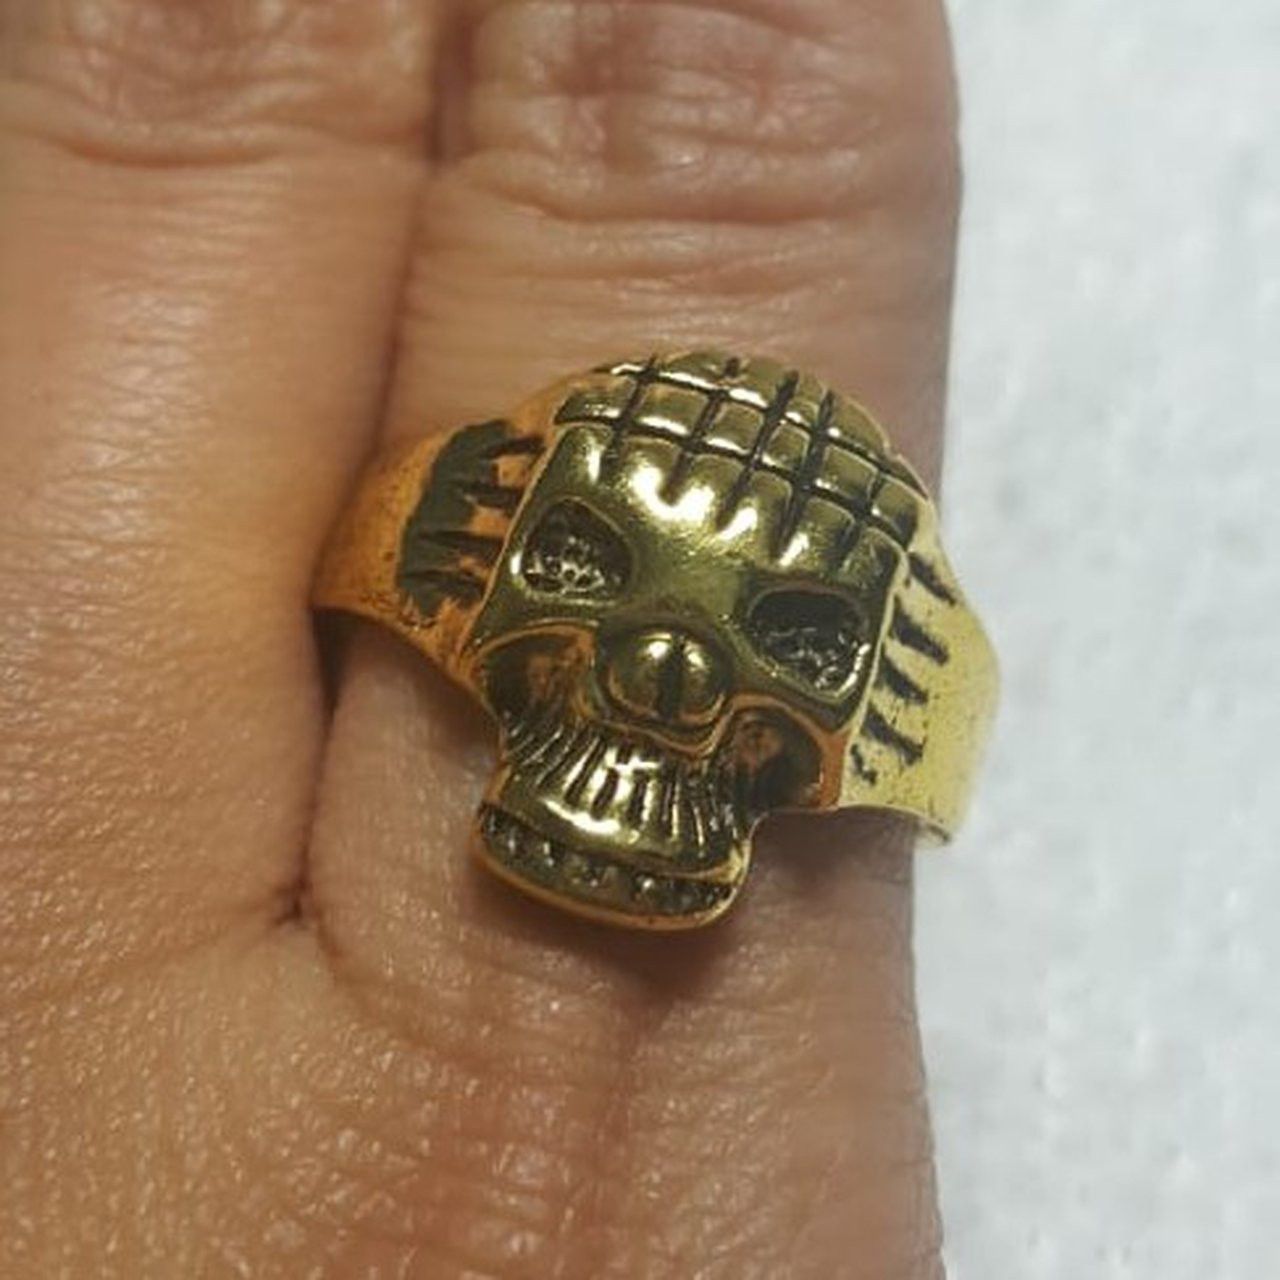 Vintage Tibet Silver Gold plated Skull Punk Rock Style Retro Men Women Rings Size - 9.25 Hip Hop Ring. Alloy Relievo Ring RGN-08 ***Shipping Only***